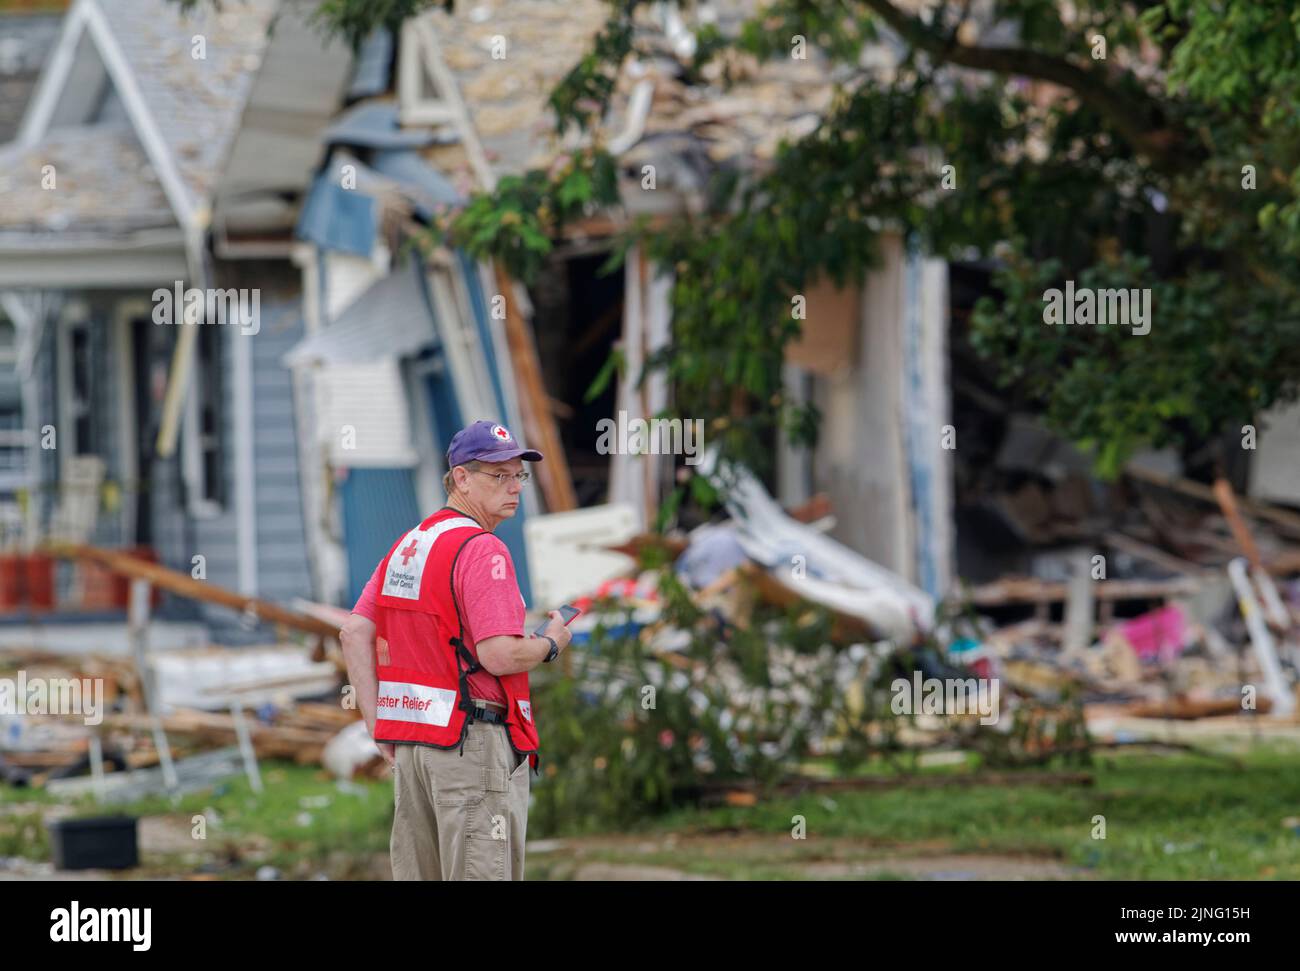 Evansville, Indiana, USA. 11 Aug 2022. American Red Cross disaster relief volunteer Brian Southern surveys the scene where a house exploded the previous day. Local, state and federal authorities are investigating the explosion, which killed at least three people and damaged 39 homes in the area, leaving 11 uninhabitable. (Credit: Billy Suratt/Apex MediaWire via Alamy Live News) Stock Photo